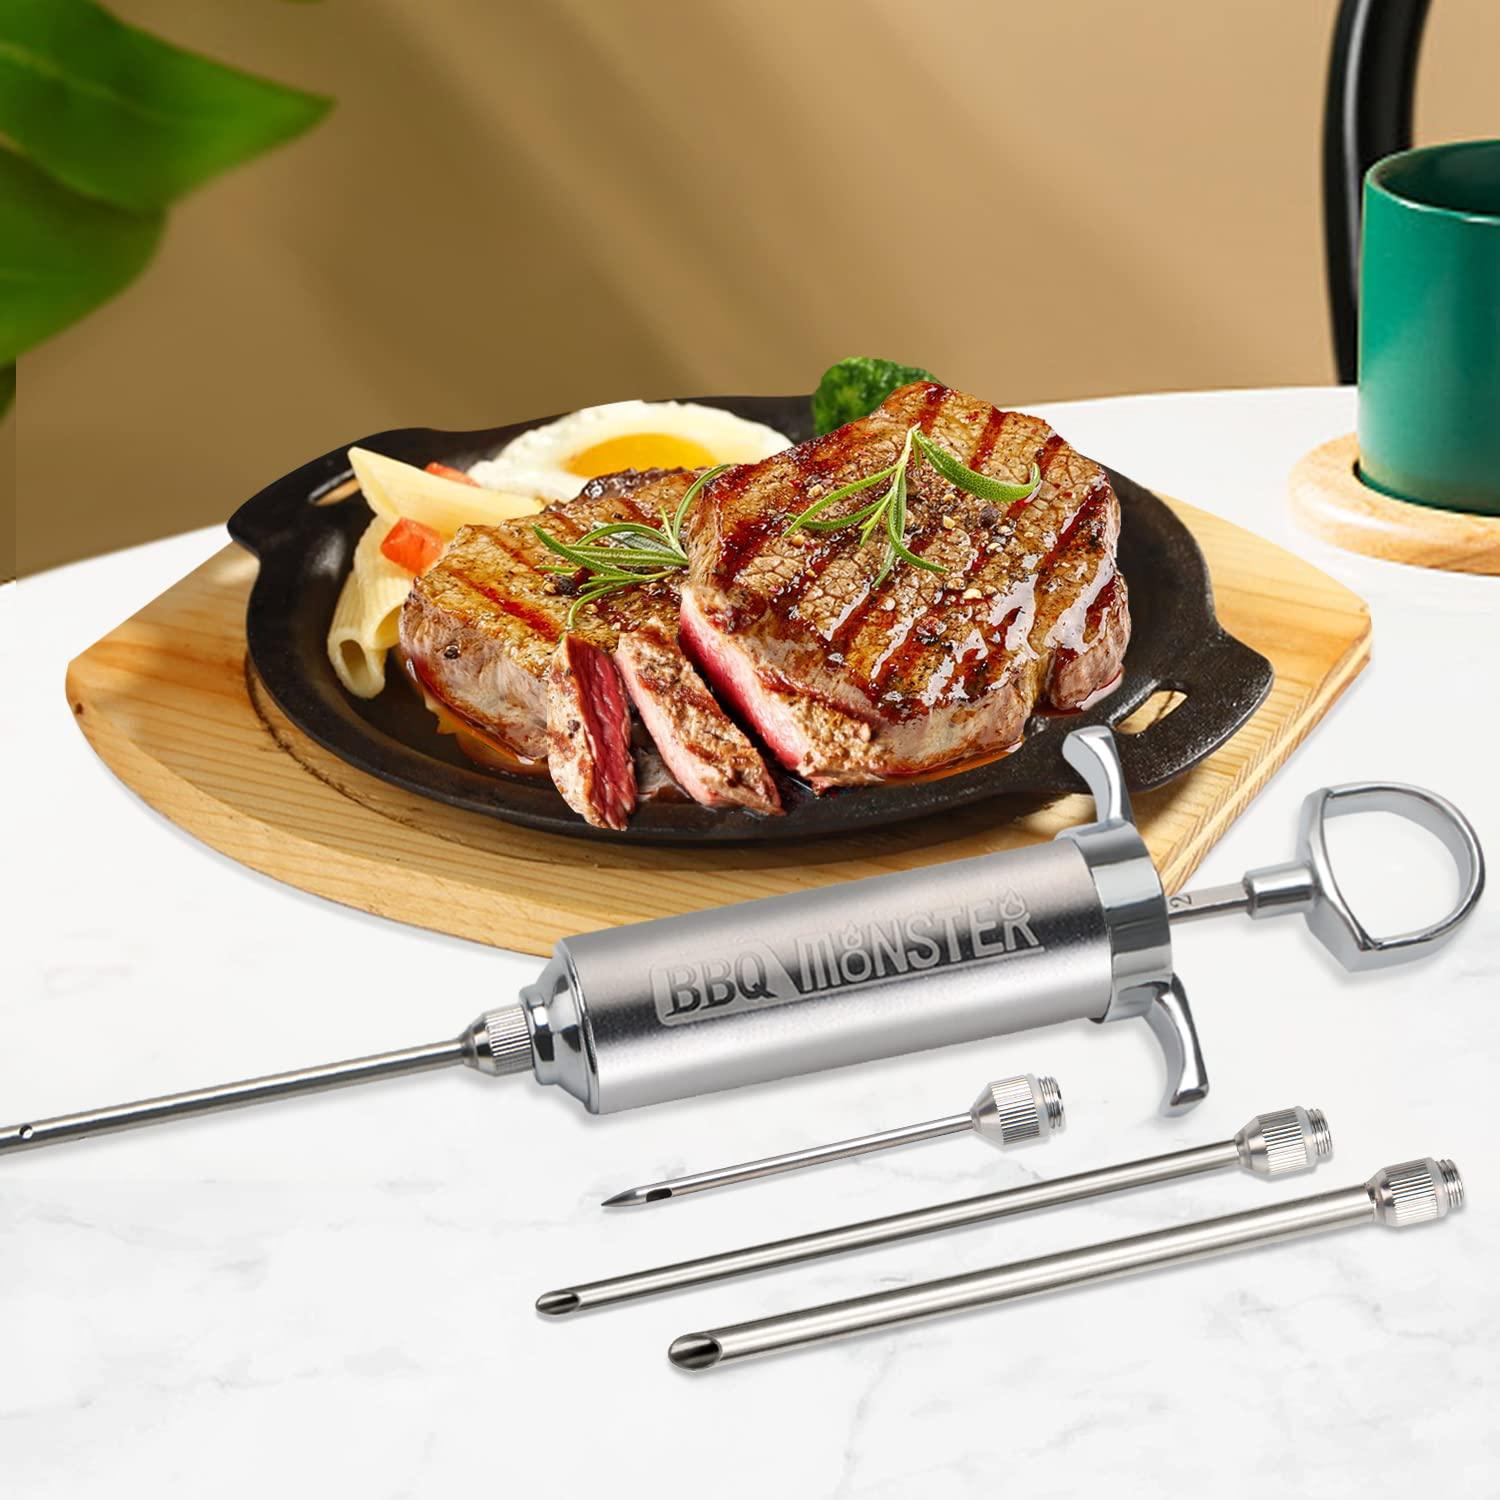 BBQ Monster Meat Injector Syringe Kit with 4 Professional Marinade Injector Needles for BBQ Grill Smoker, Turkey and Brisket; 2-oz Large Capacity, Including Paper User Manual, Recipe E-Book (PDF) - CookCave